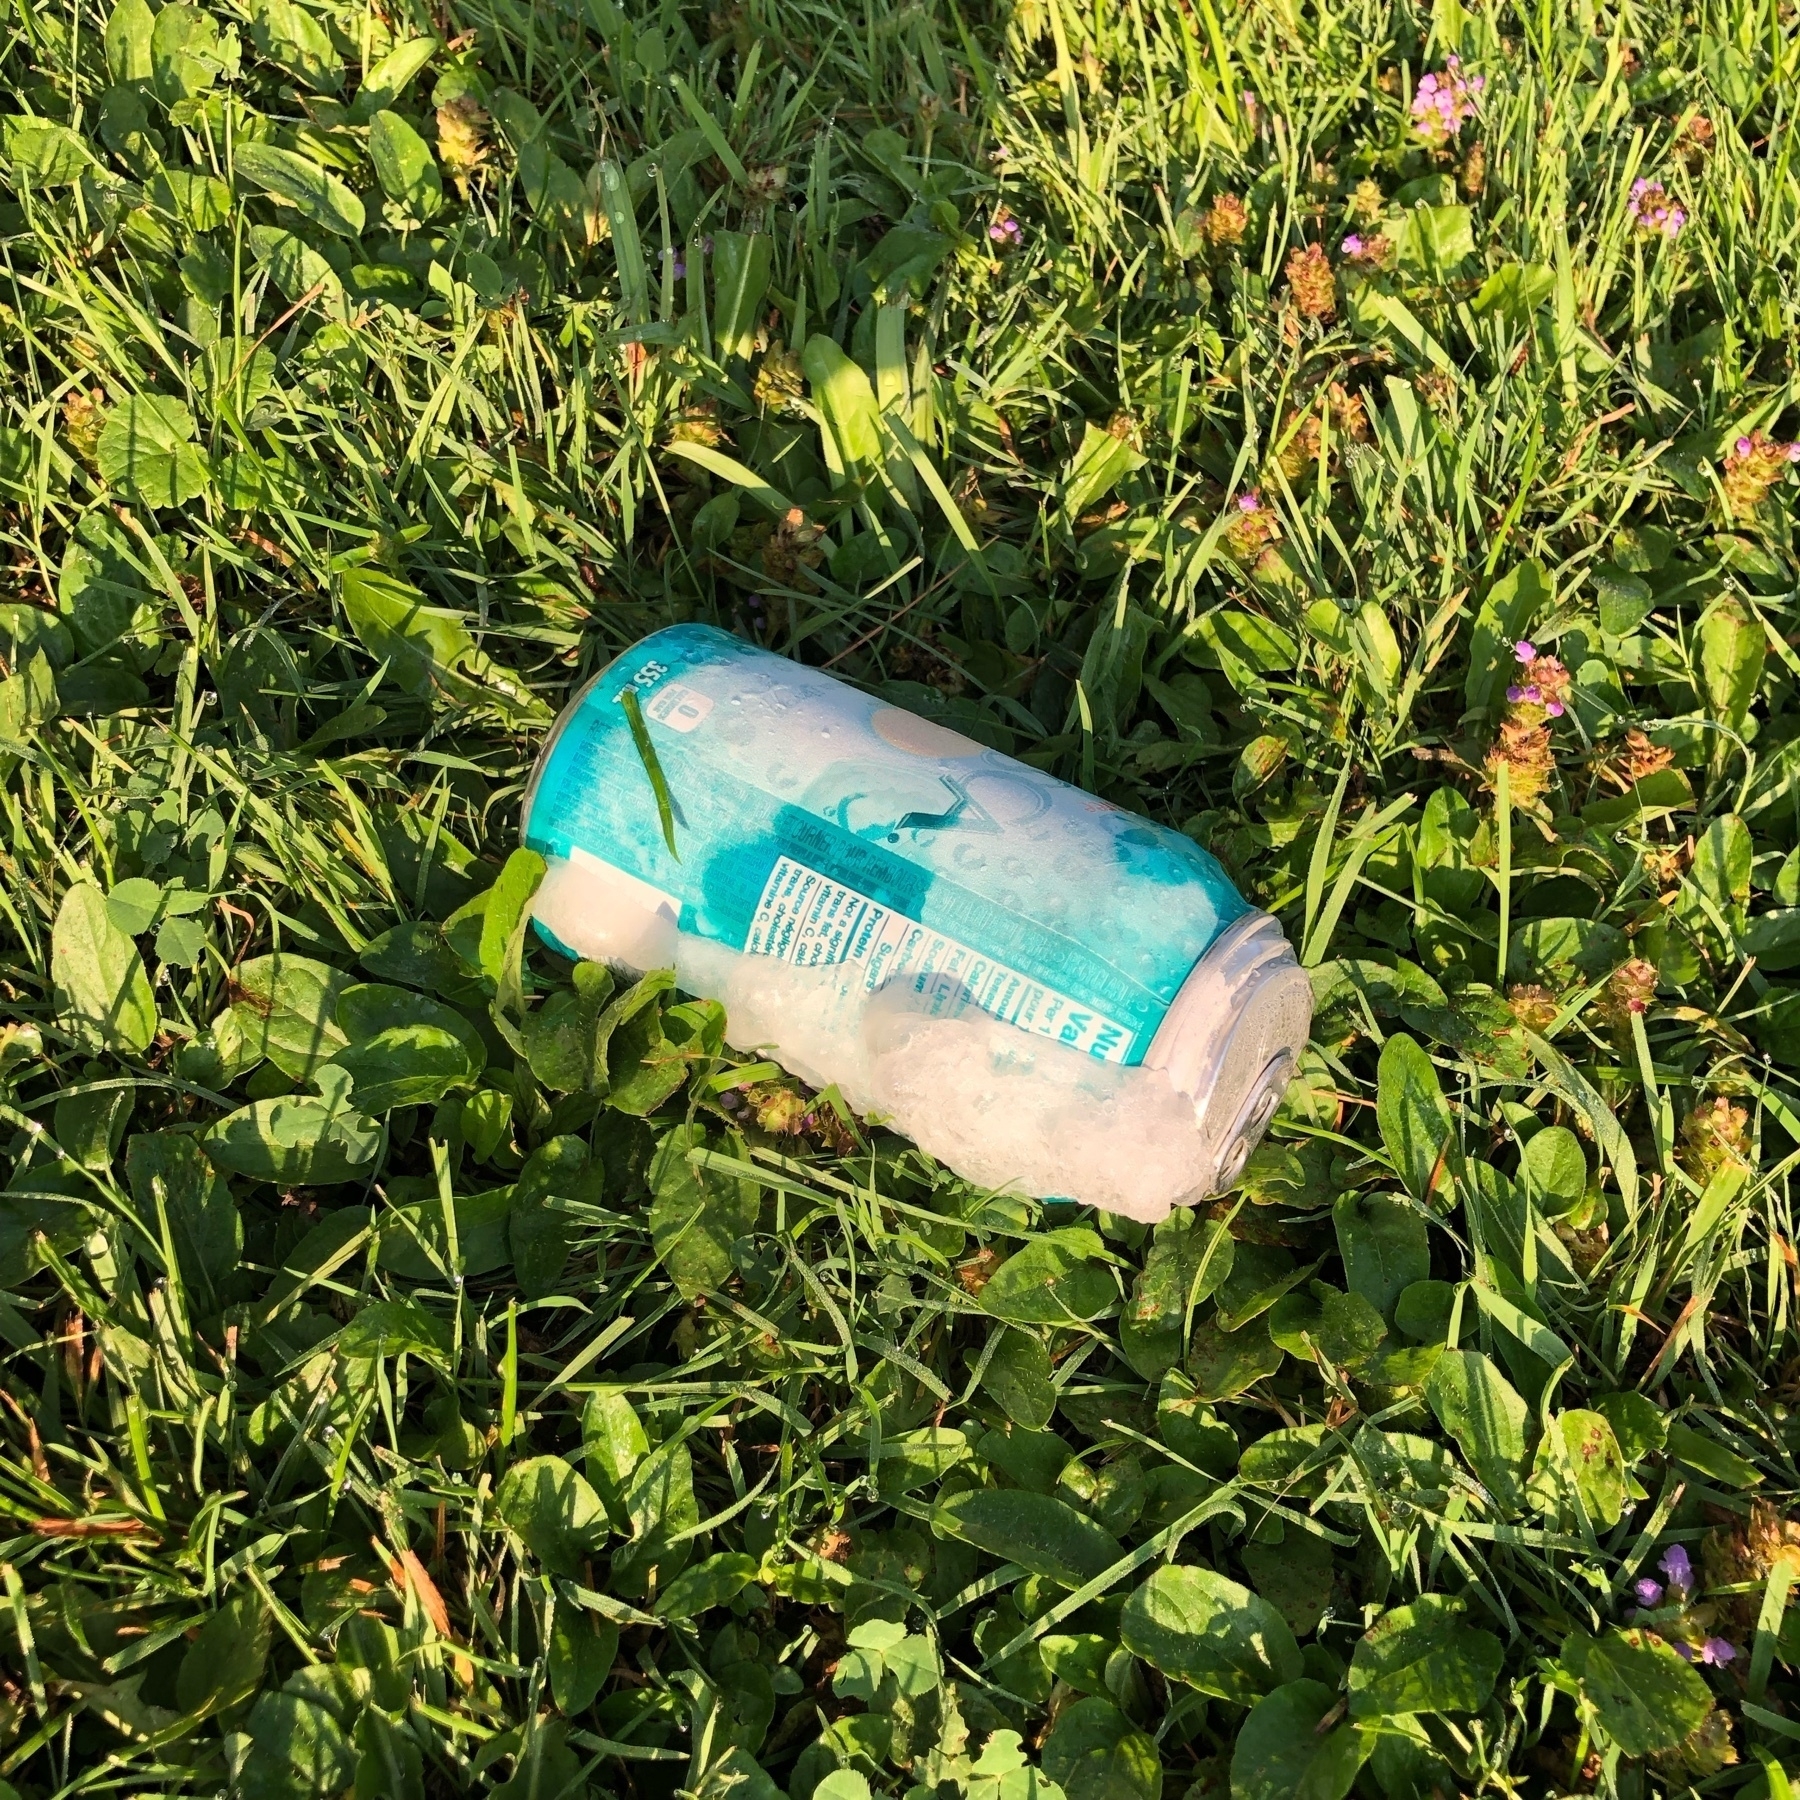 puffed out can of fresca sitting on grass. there is ice on the side